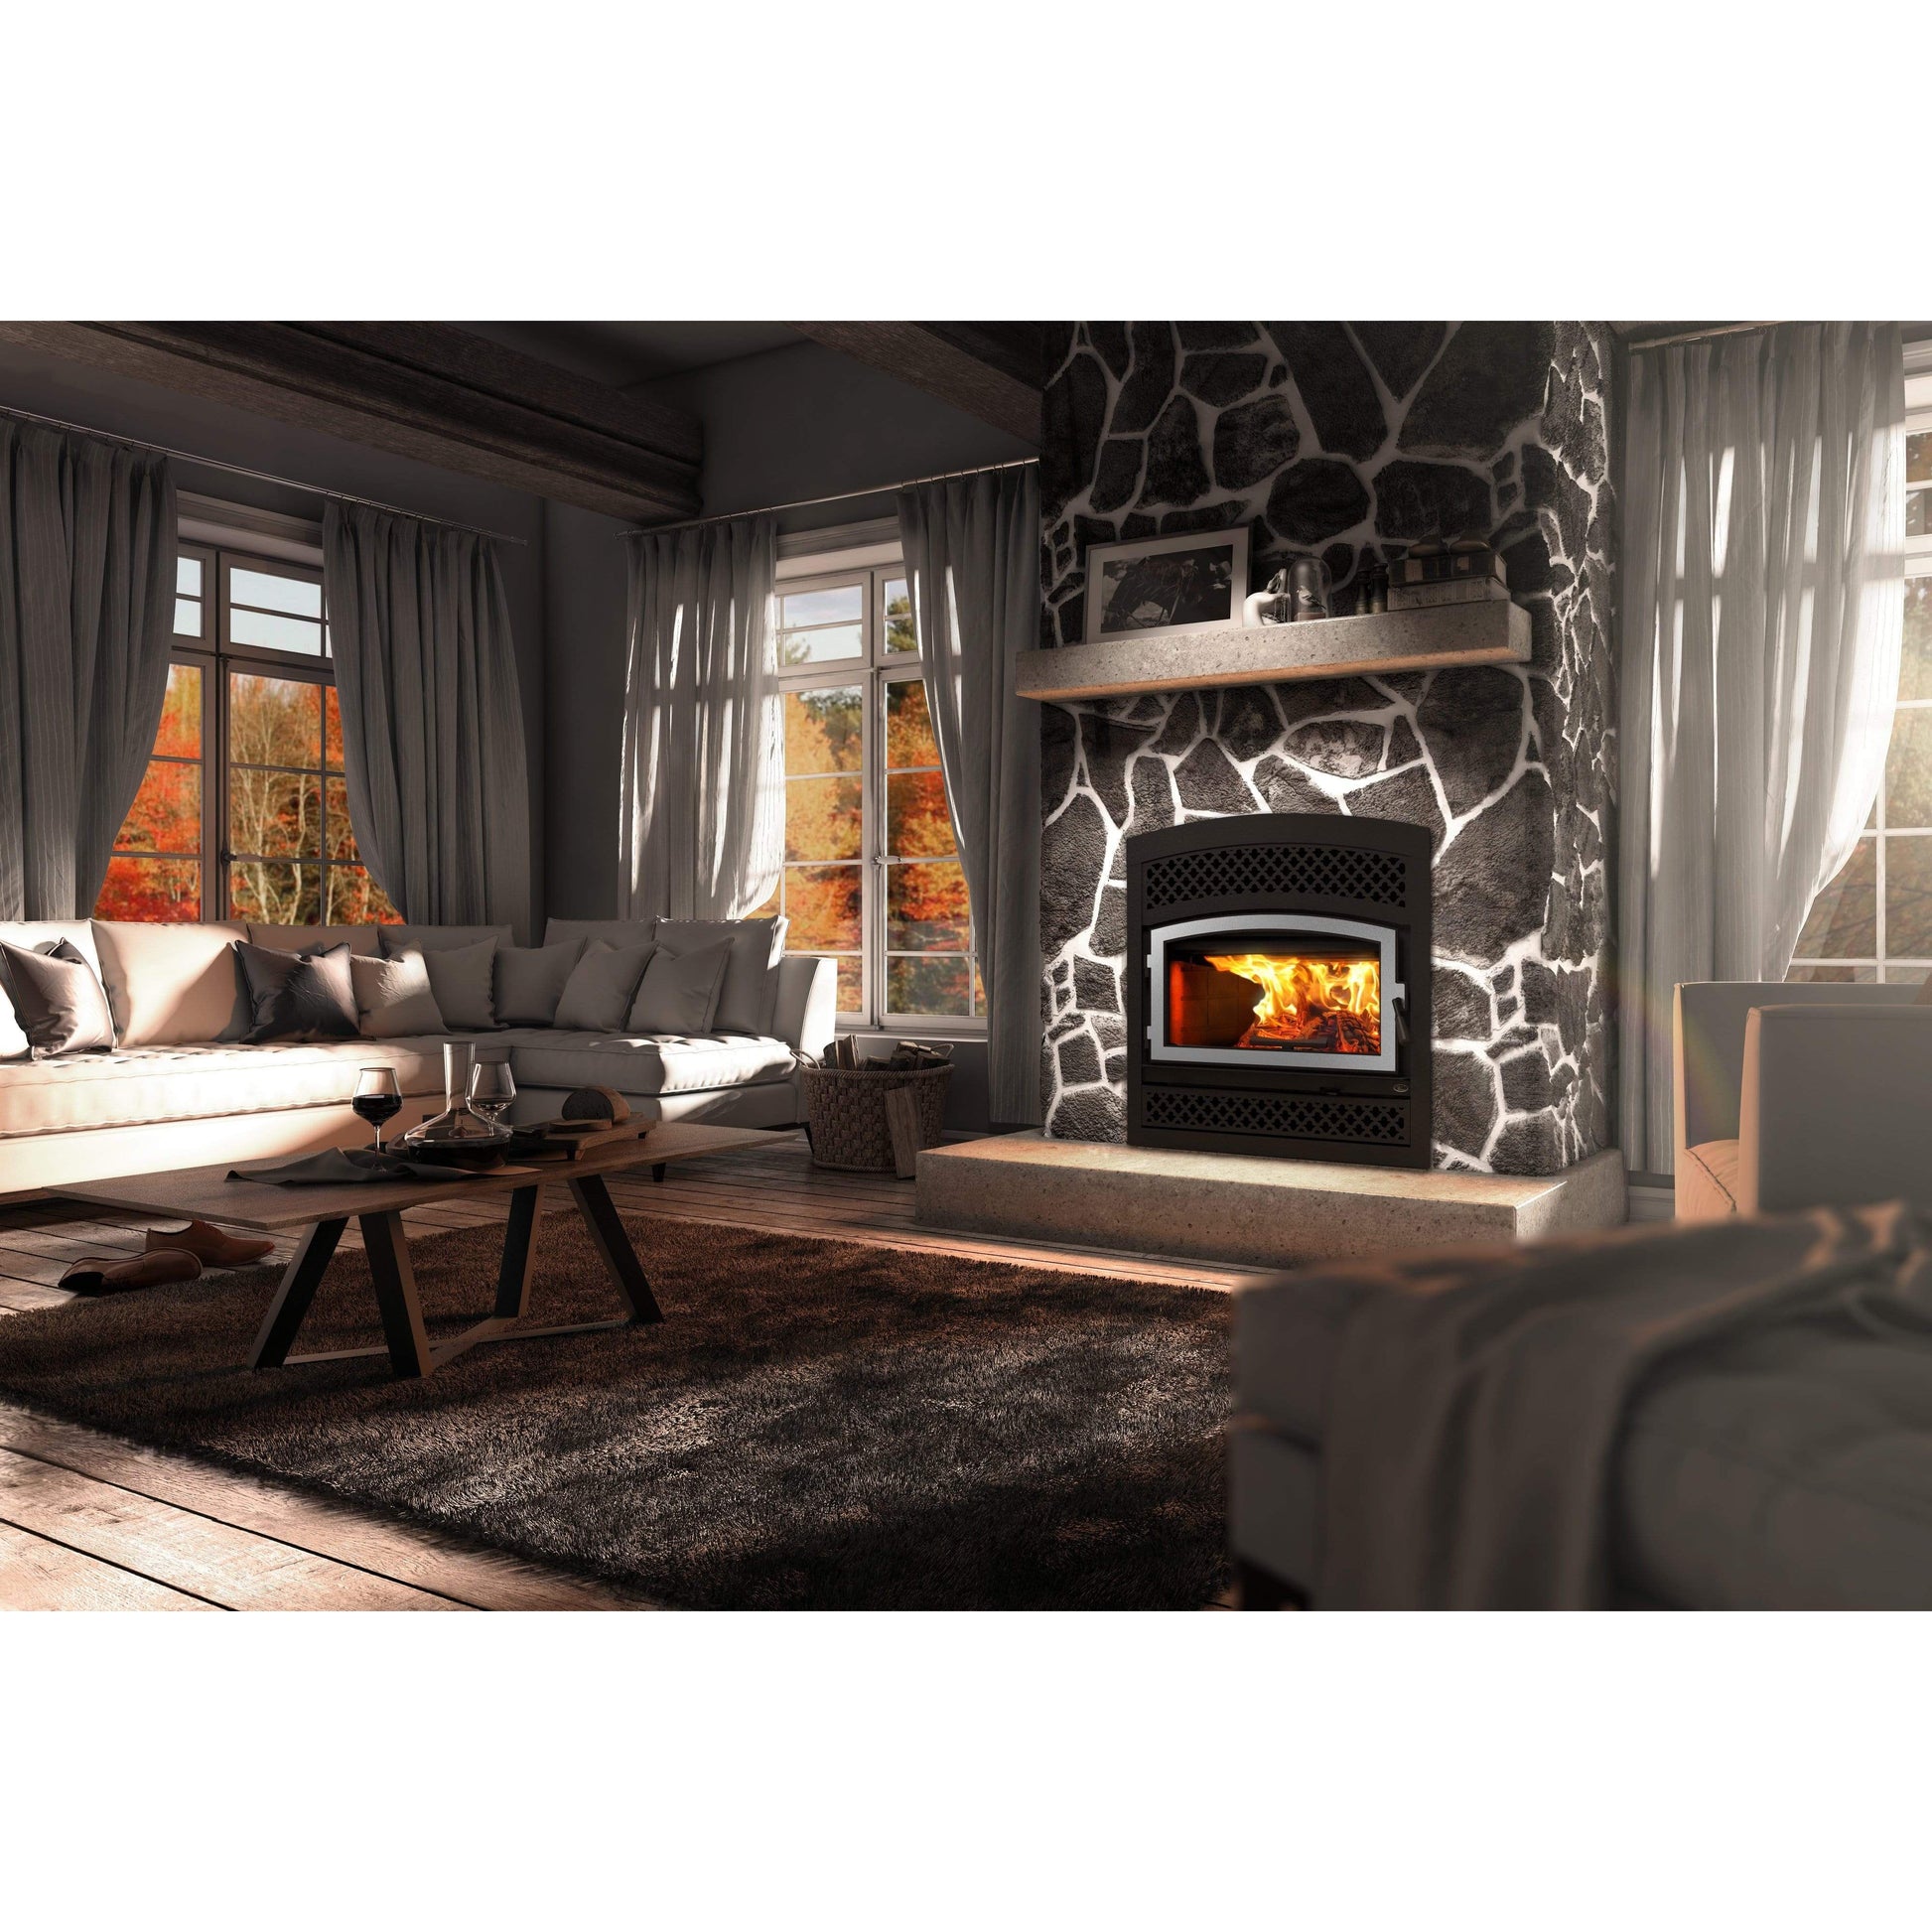 Valcourt Lafayette II High-Efficiency Controlled Combustion Fireplace (including 4 Lengths of 6" X 36" Chimney)